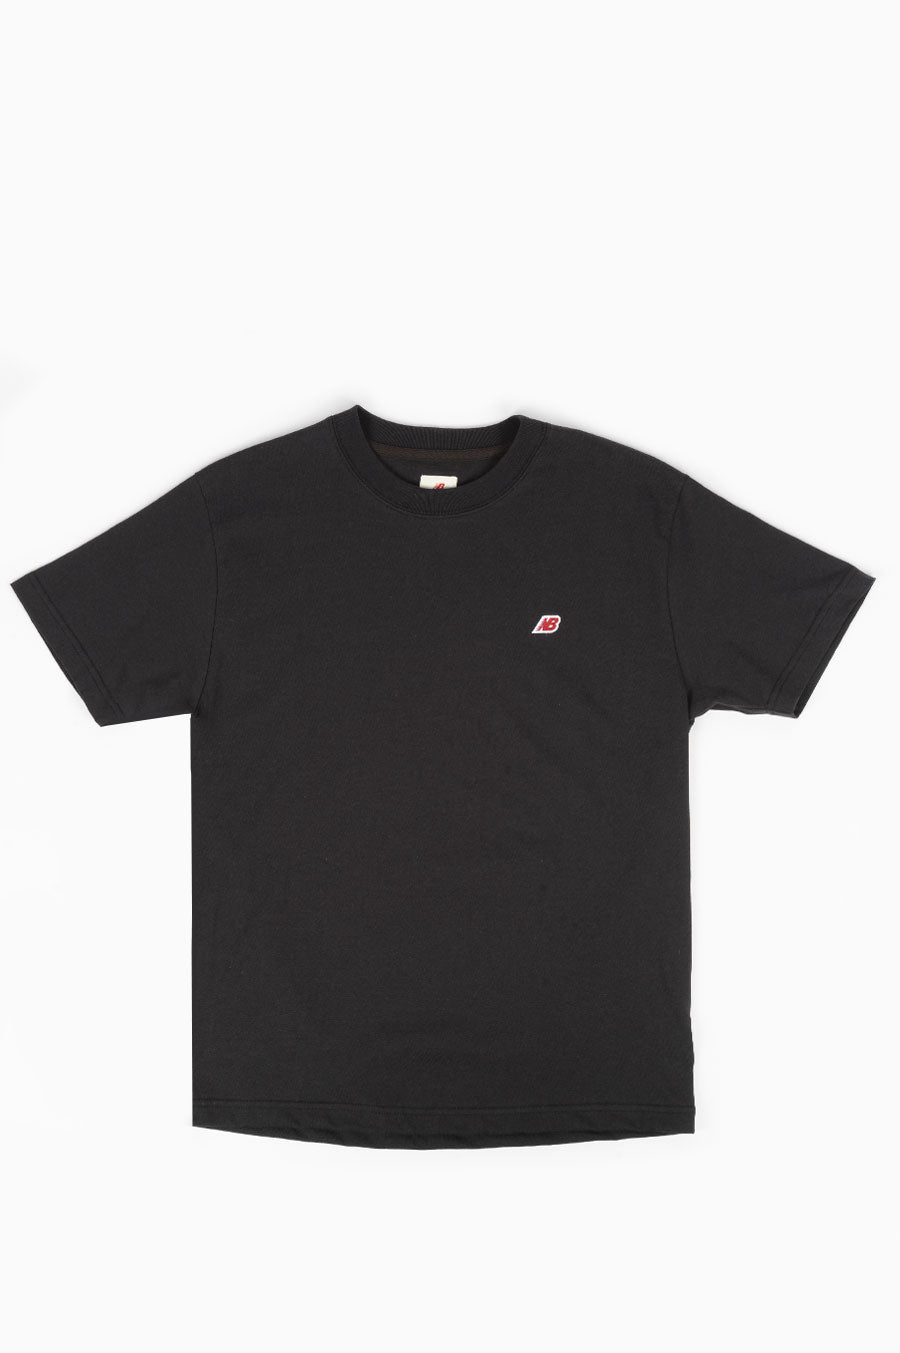 NEW BALANCE MADE IN USA SS TEE BLACK – BLENDS